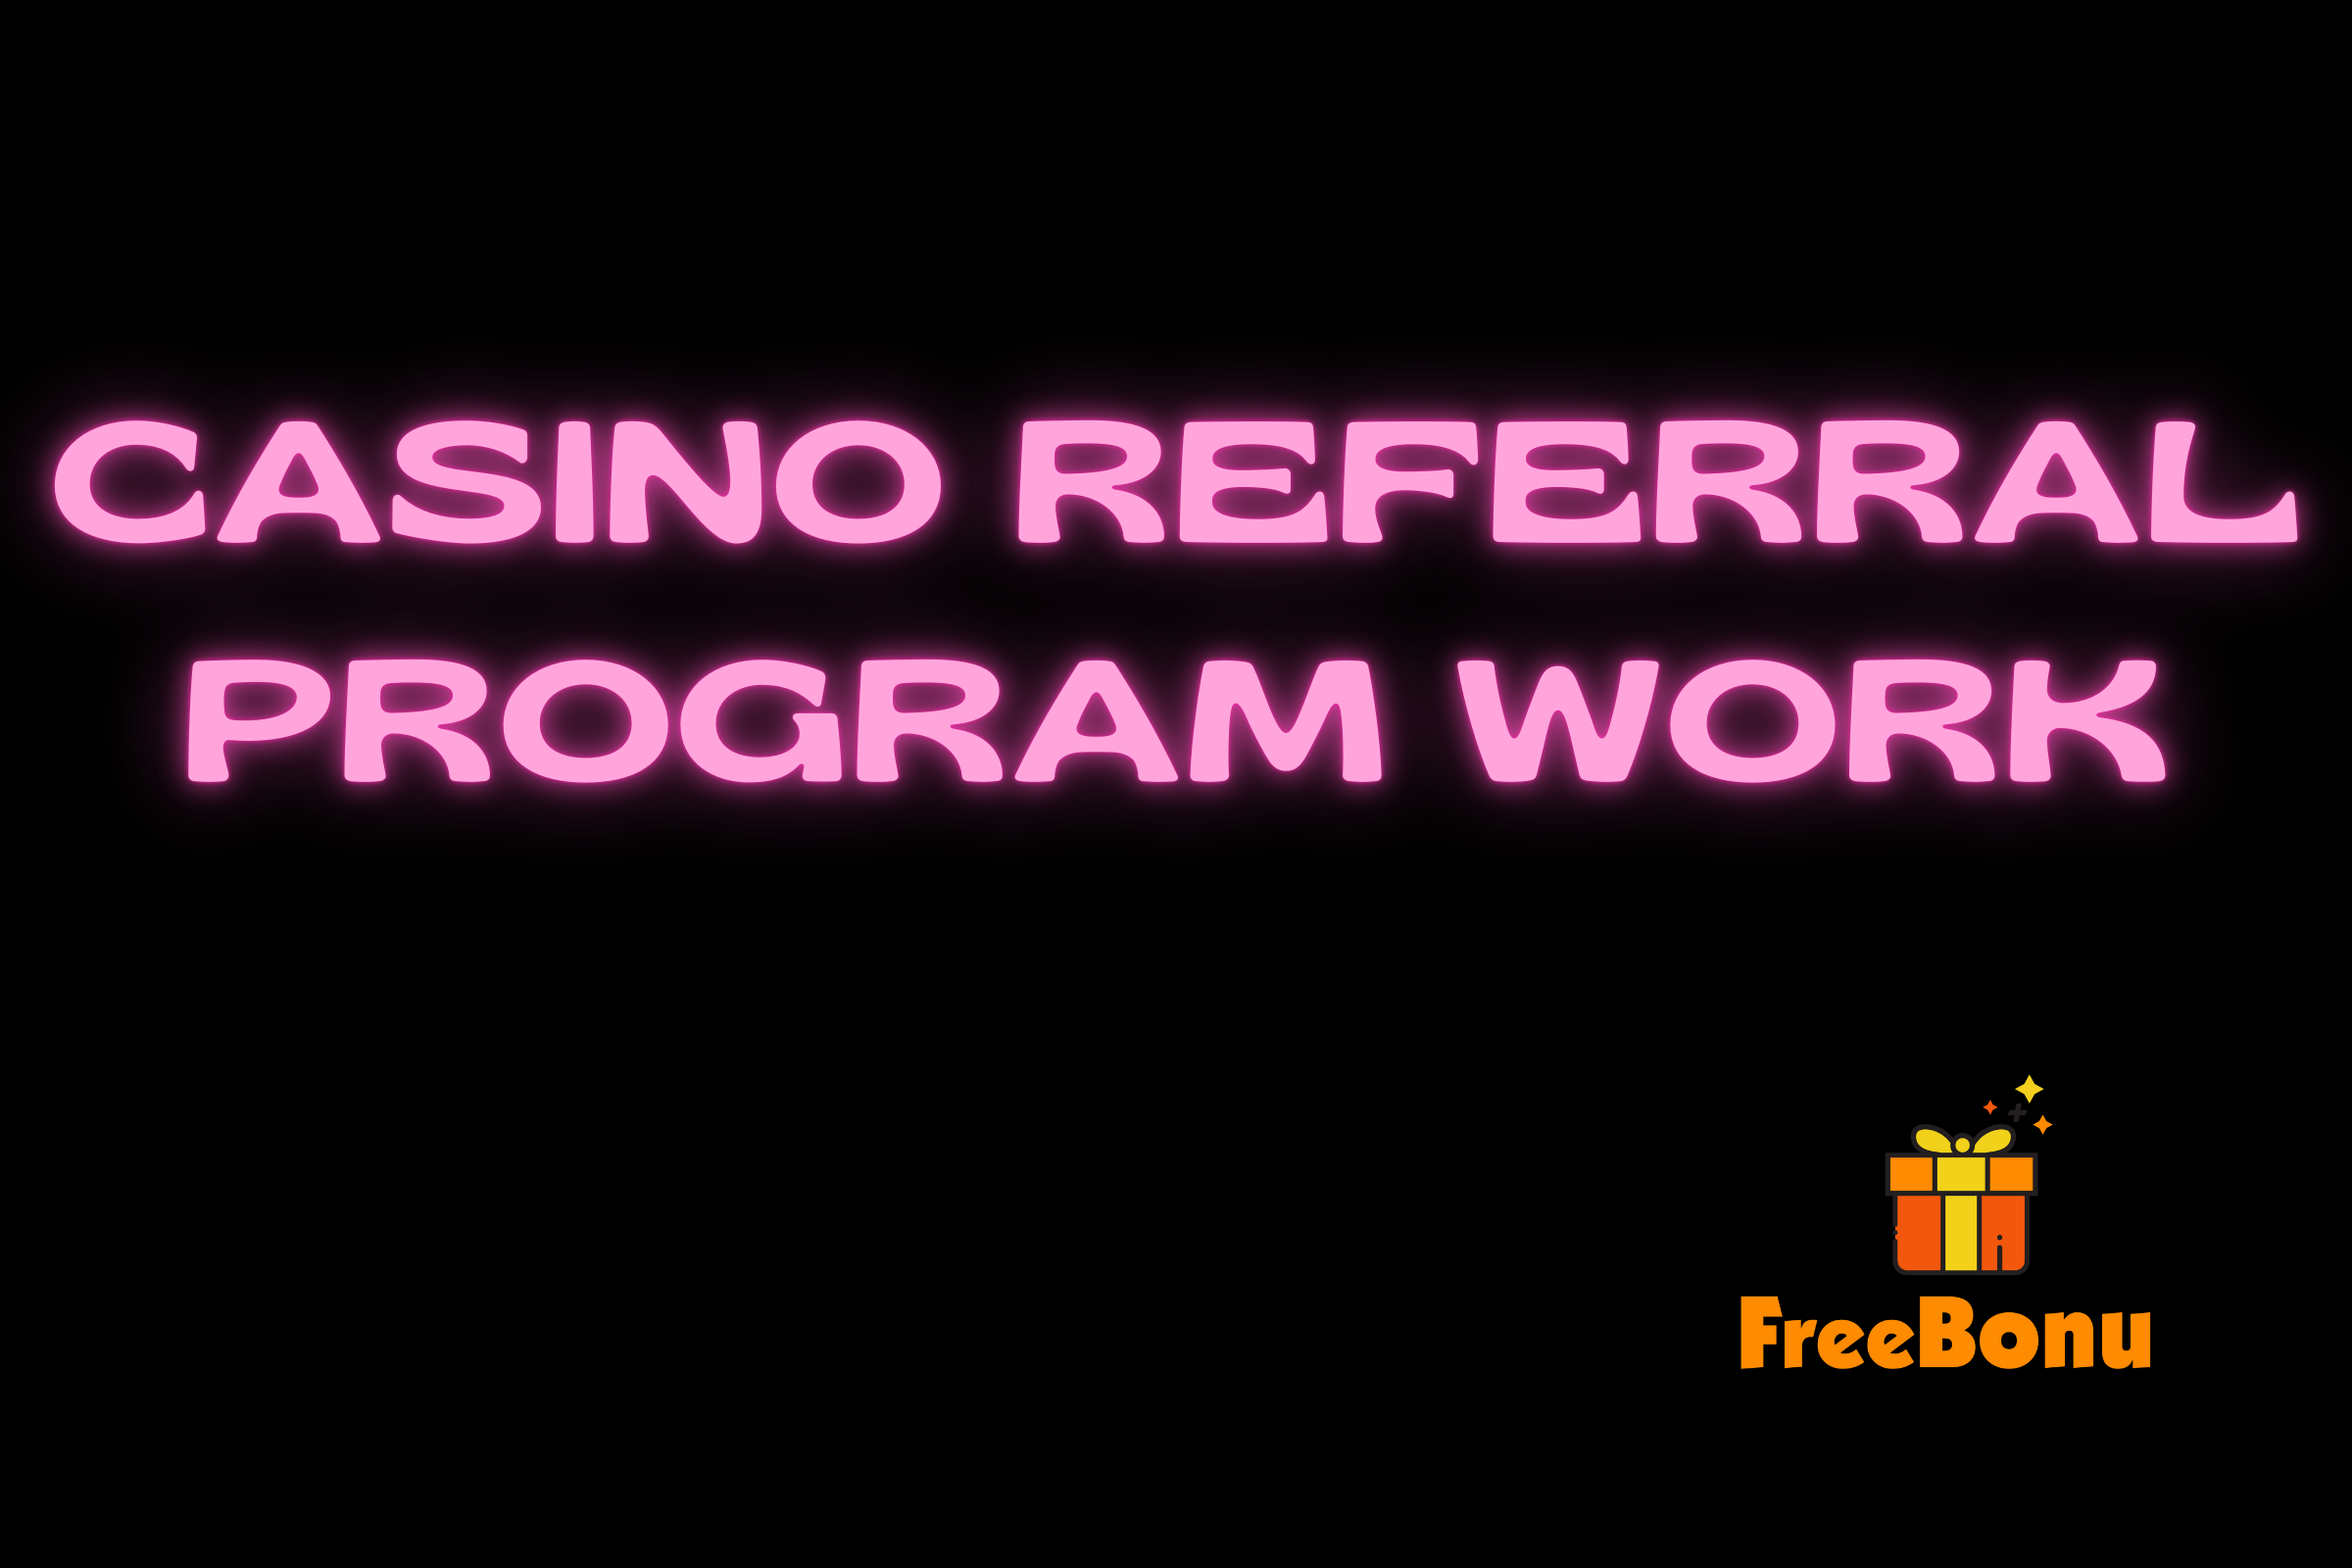 How to Use a Referral Bonus in a Casino?